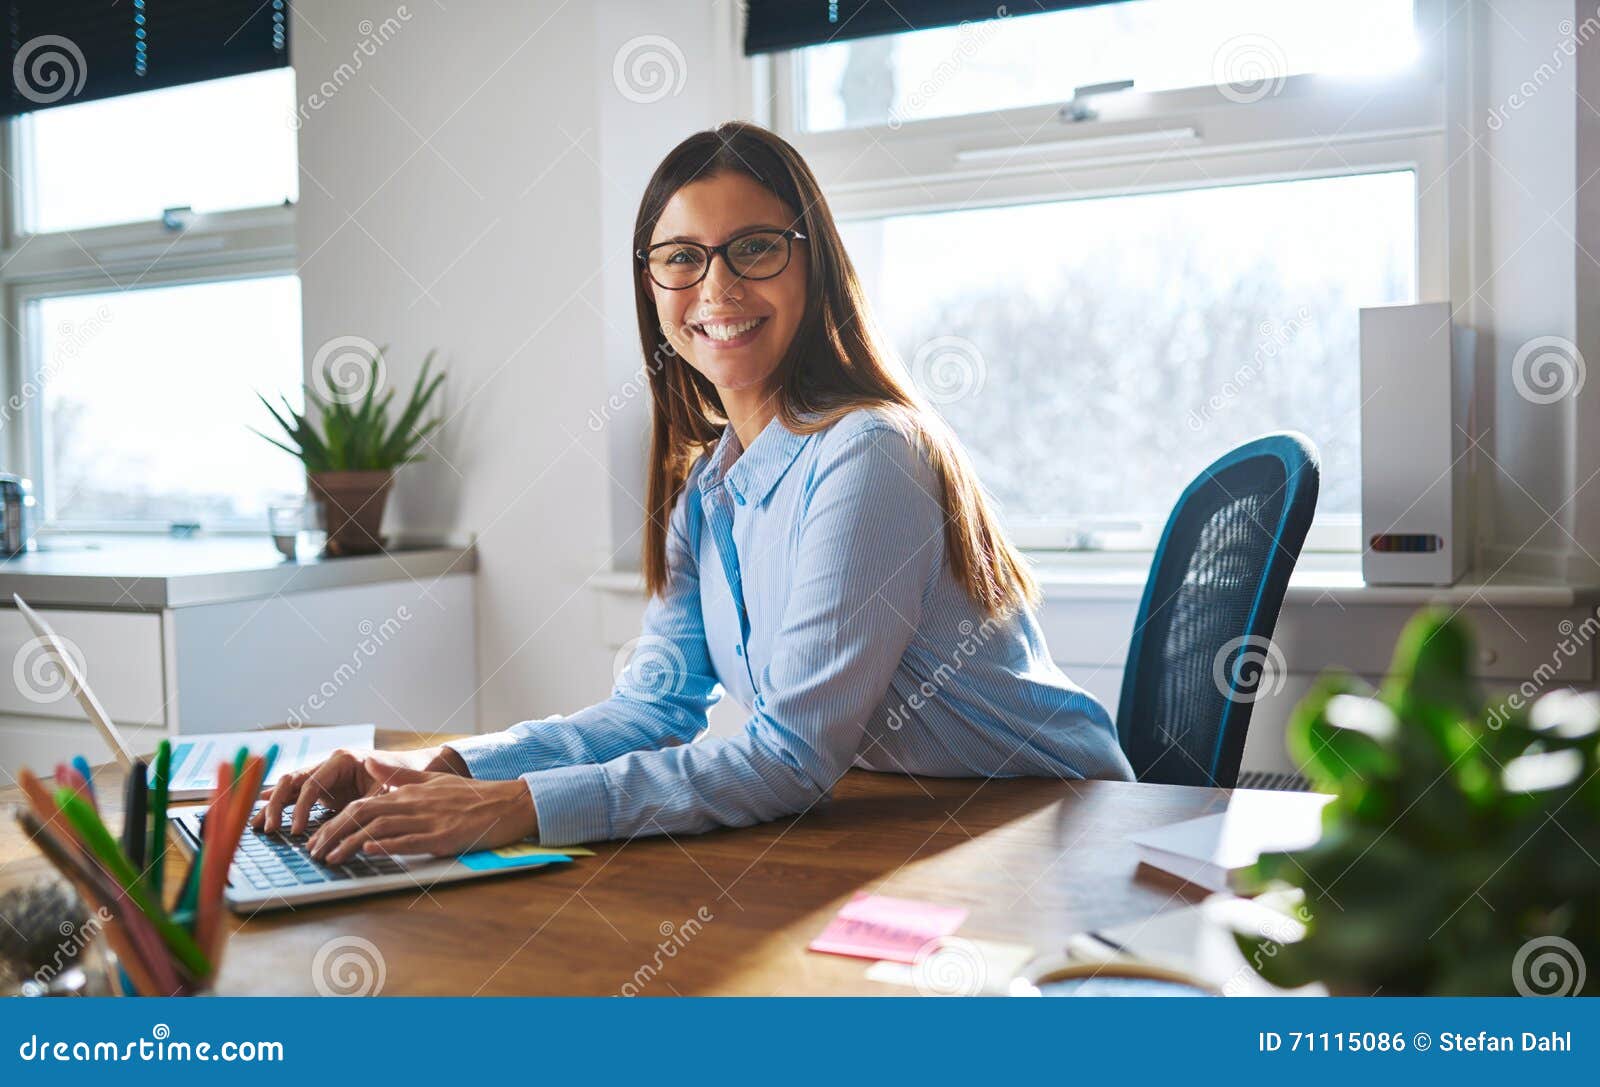 enthusiastic woman working at desk